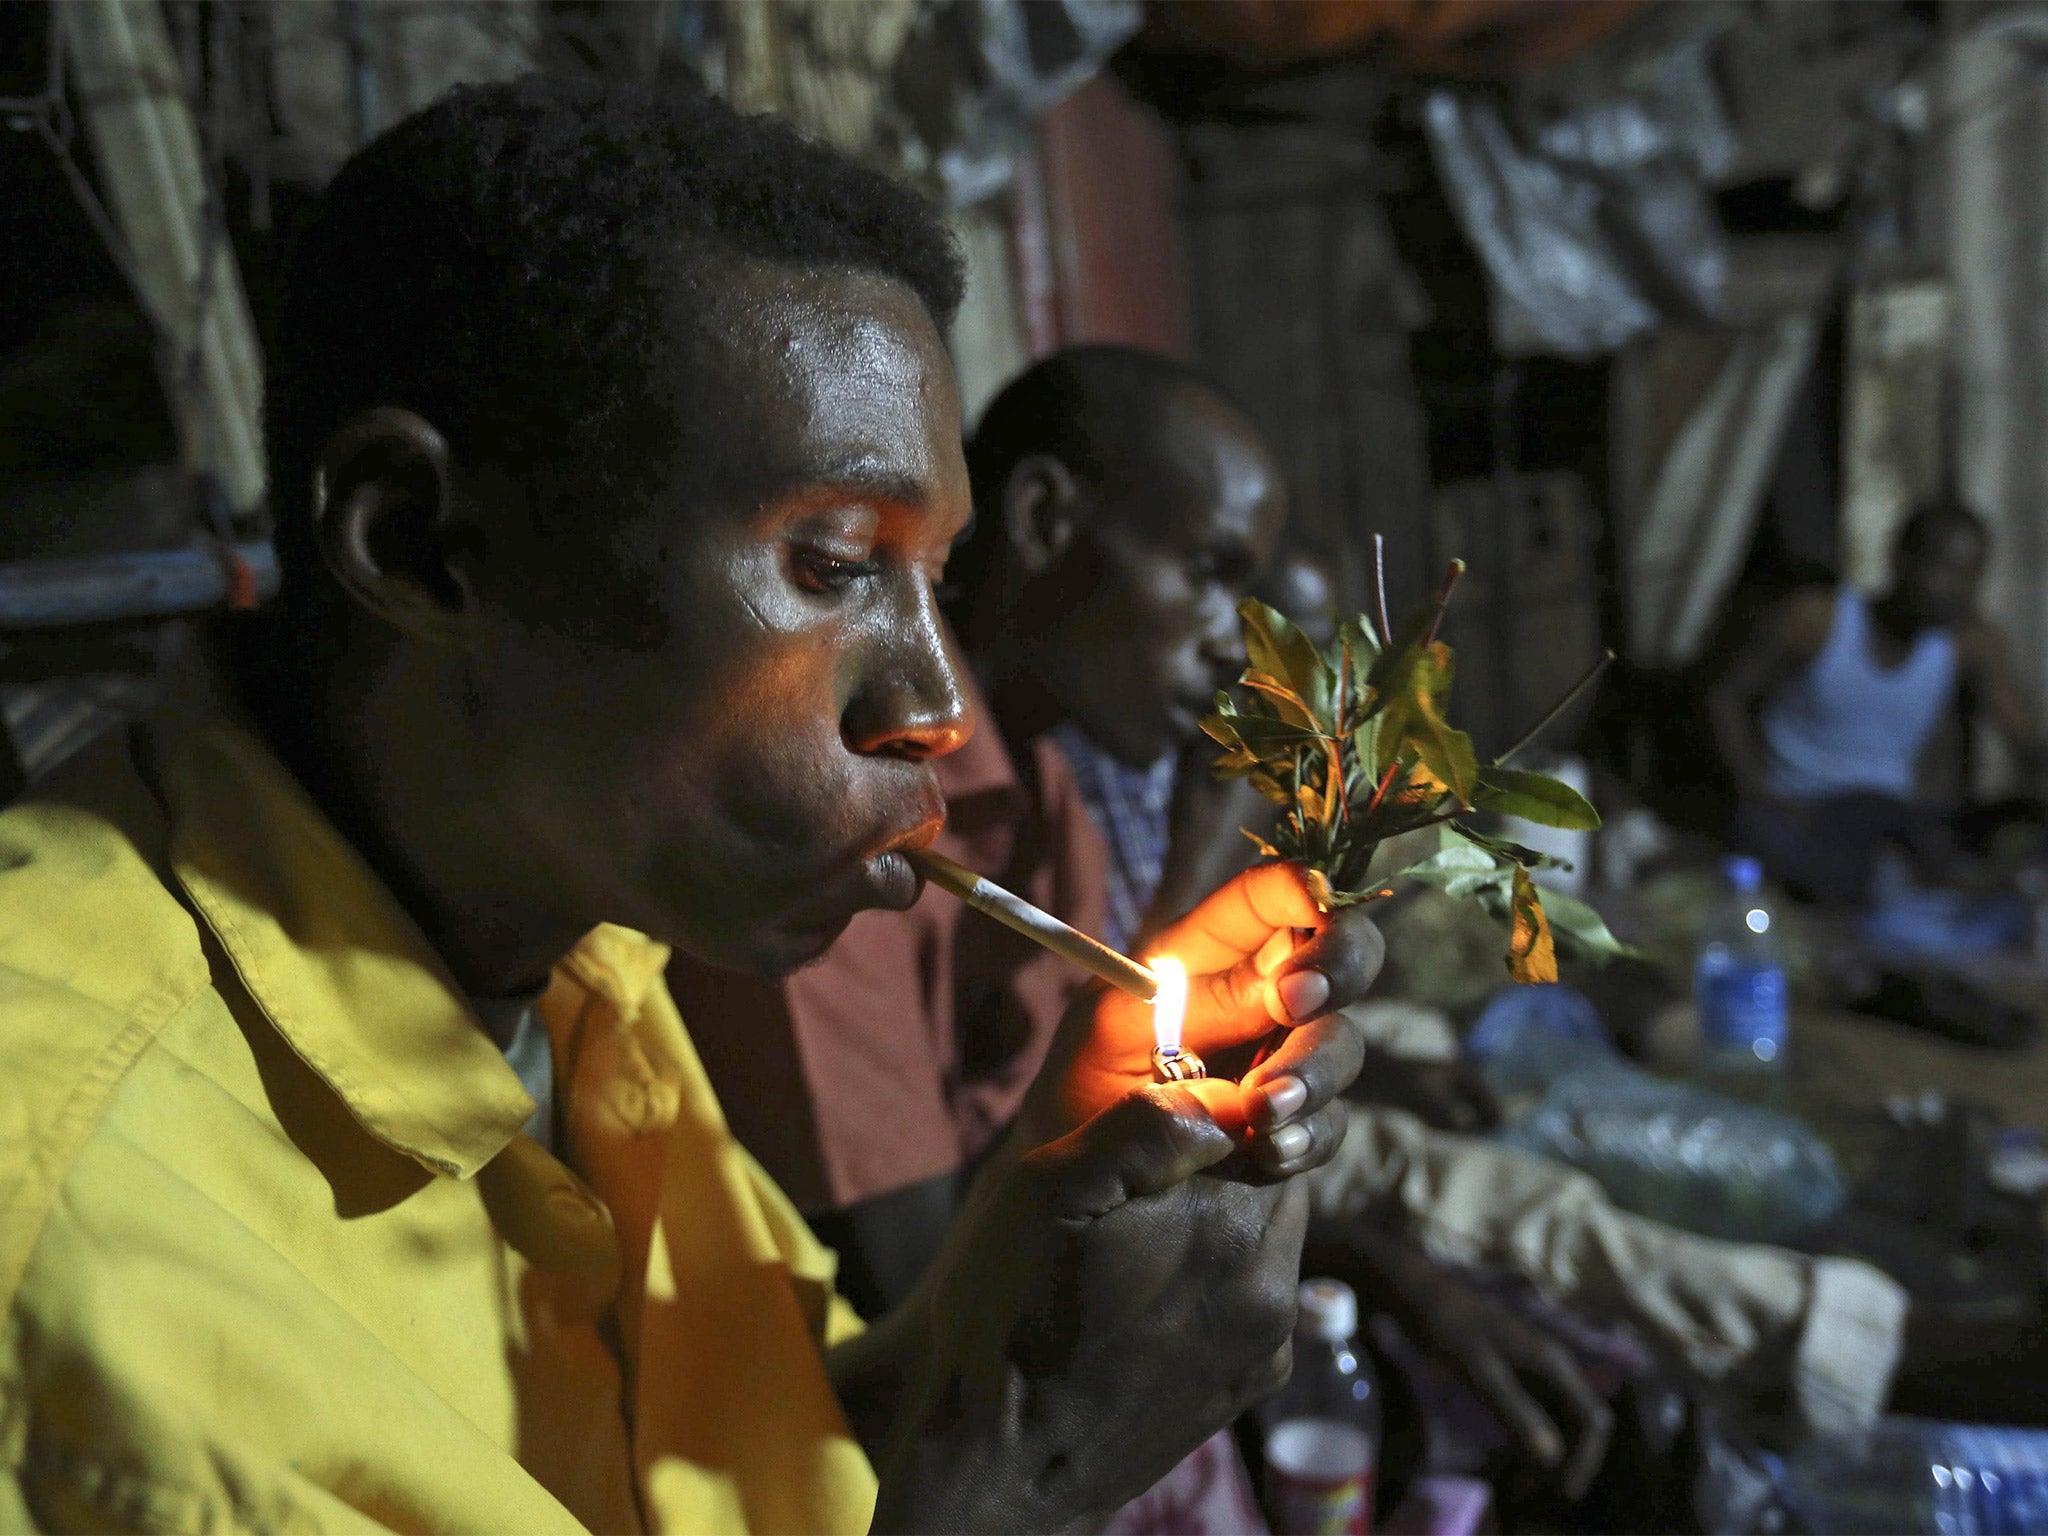 Somali men smoke and chew khat in a market in Mogadishu, where prices have fallen